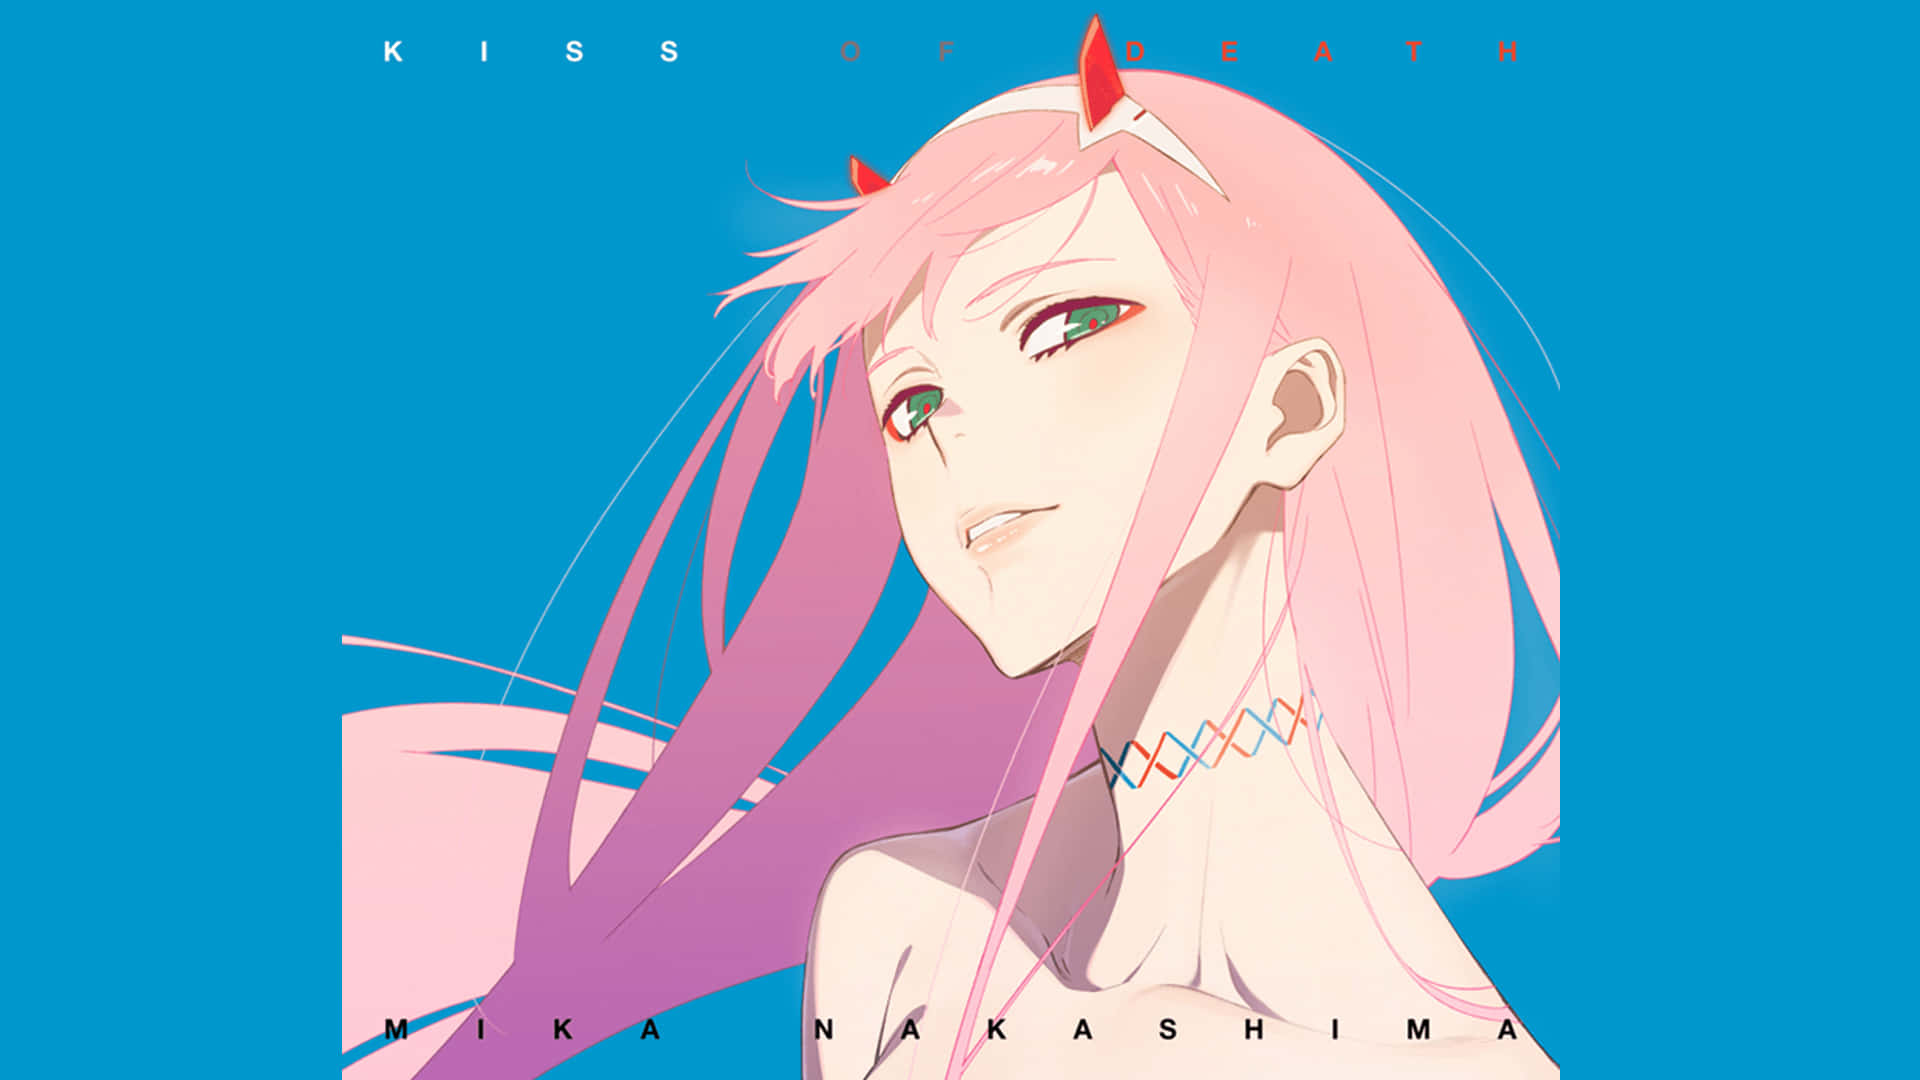 Red Lips, Teal Eyes: Zero Two's Iconic Aesthetic Background